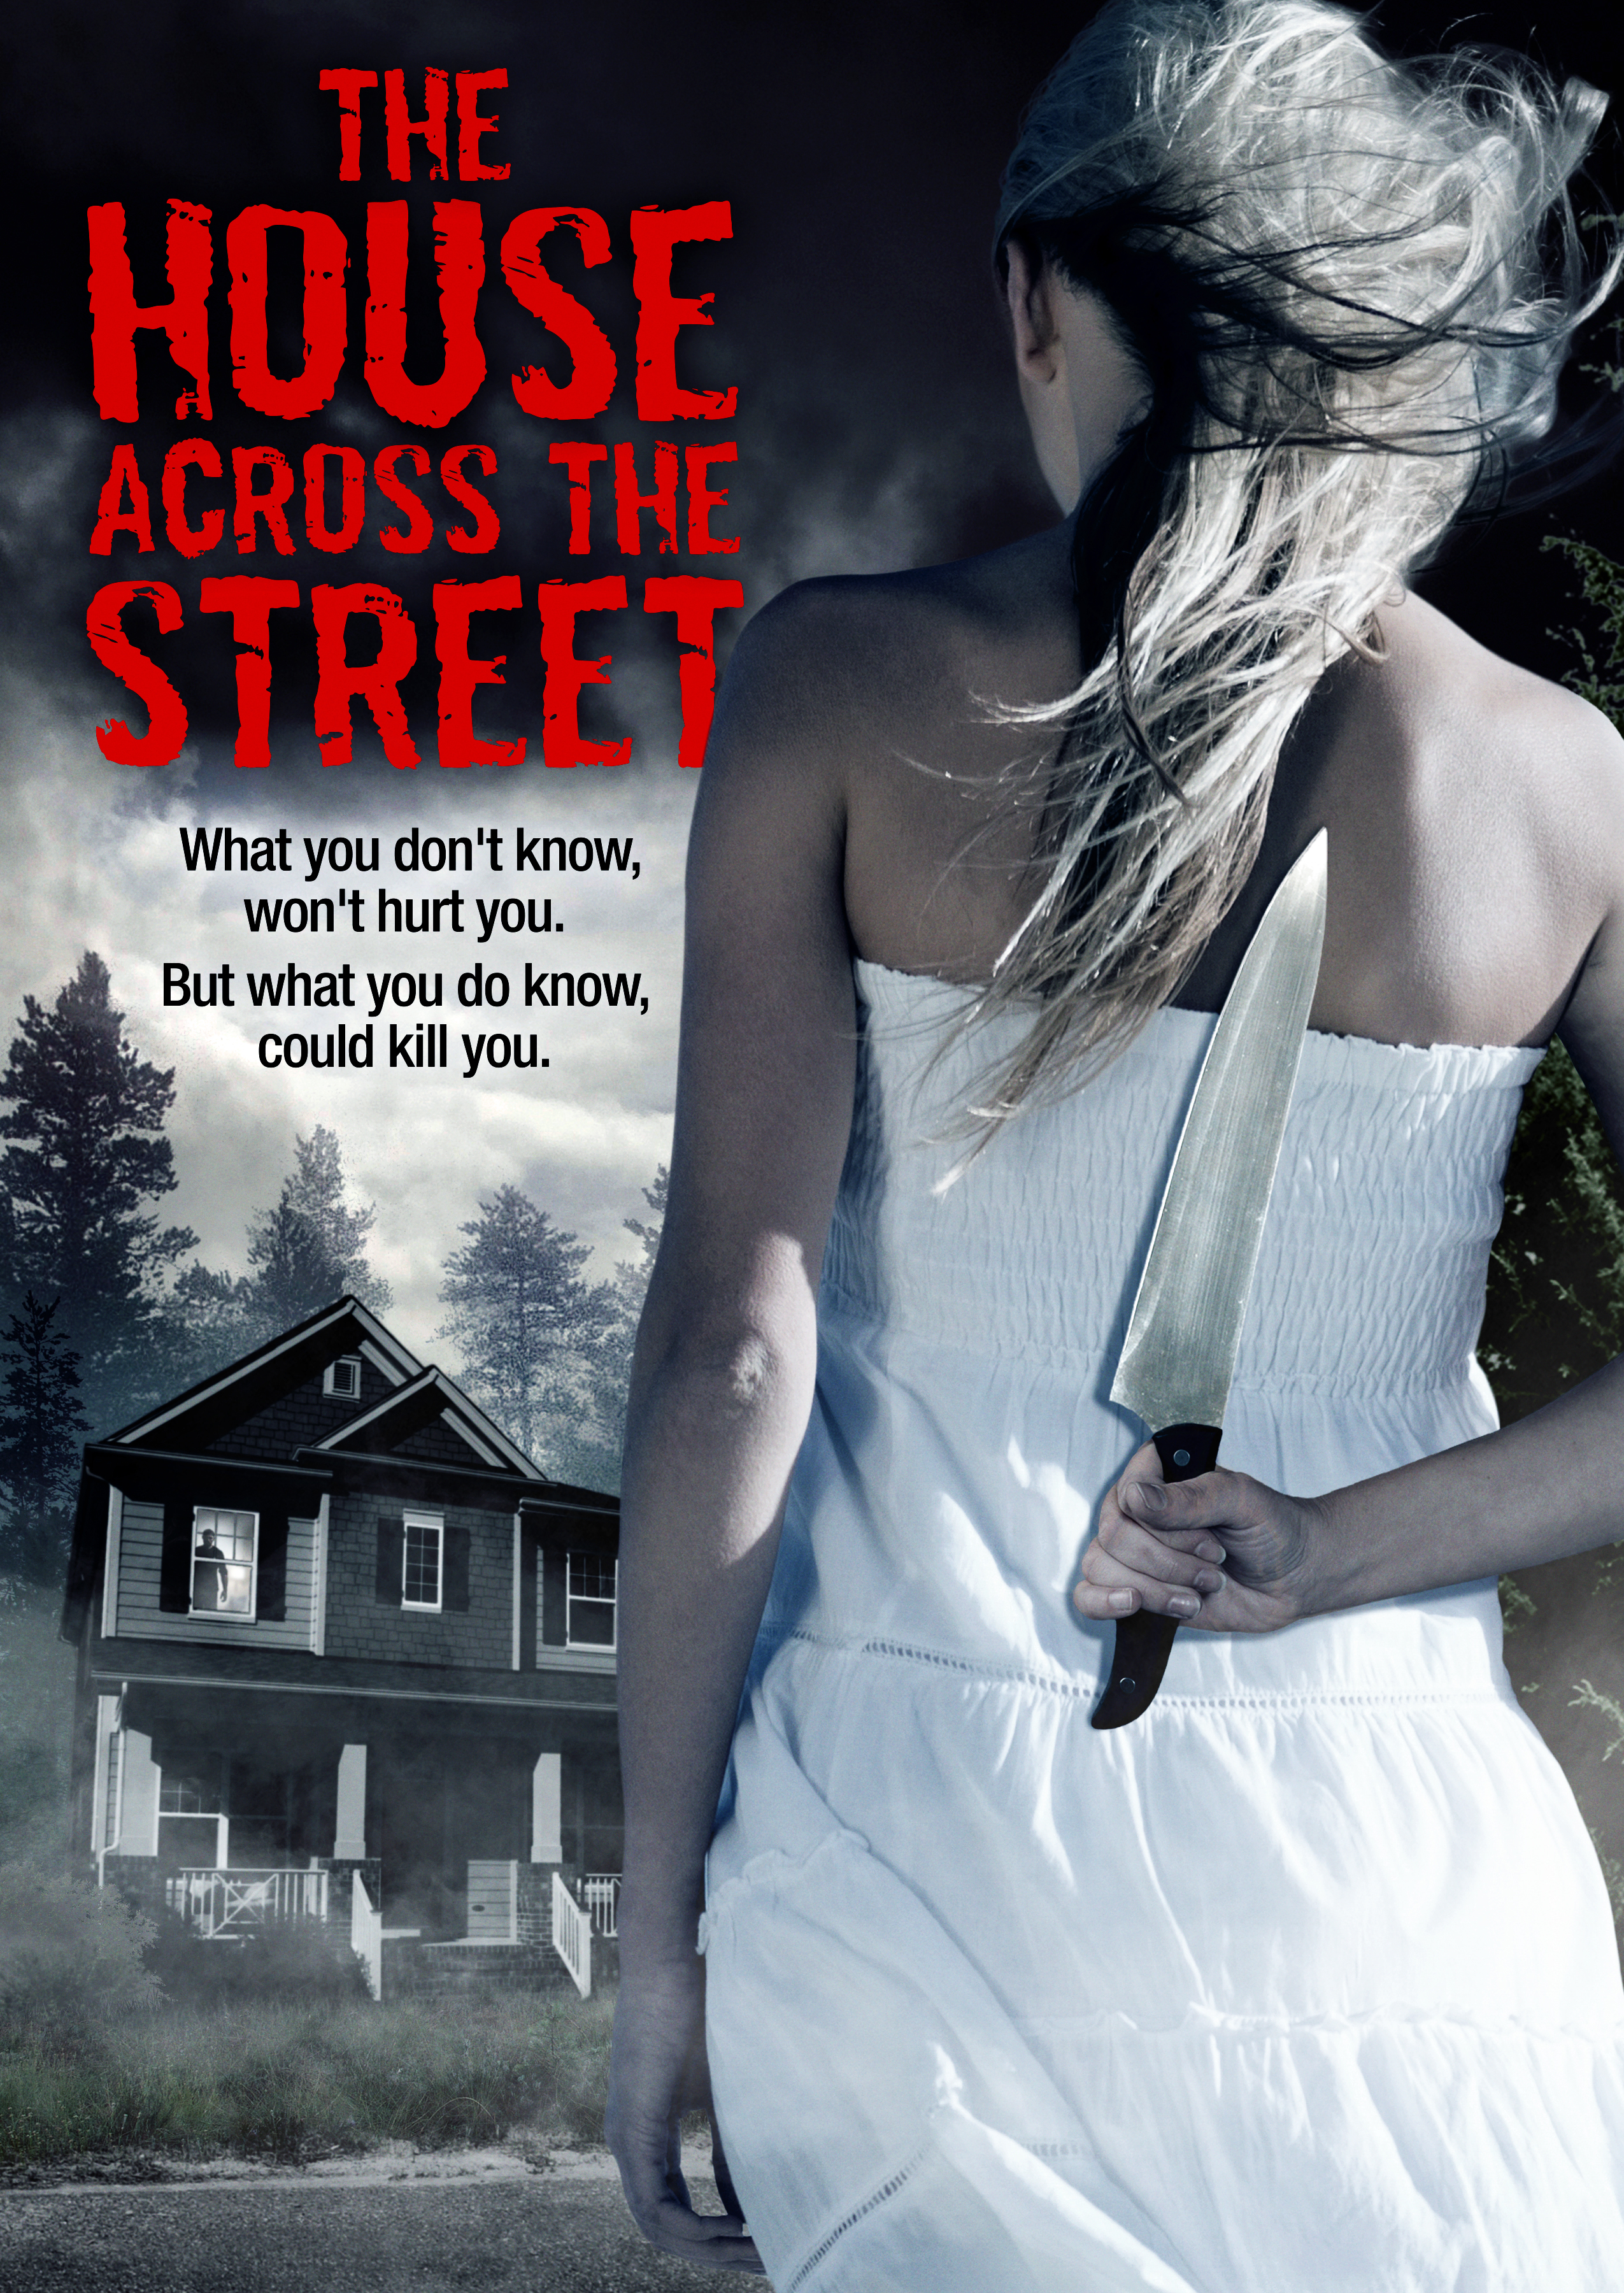 Eric Roberts, Ethan Embry, Courtney Gains, Josh Hammond, Alex Rocco, Jessica Sonneborn and Kati Salowsky in The House Across the Street (2013)